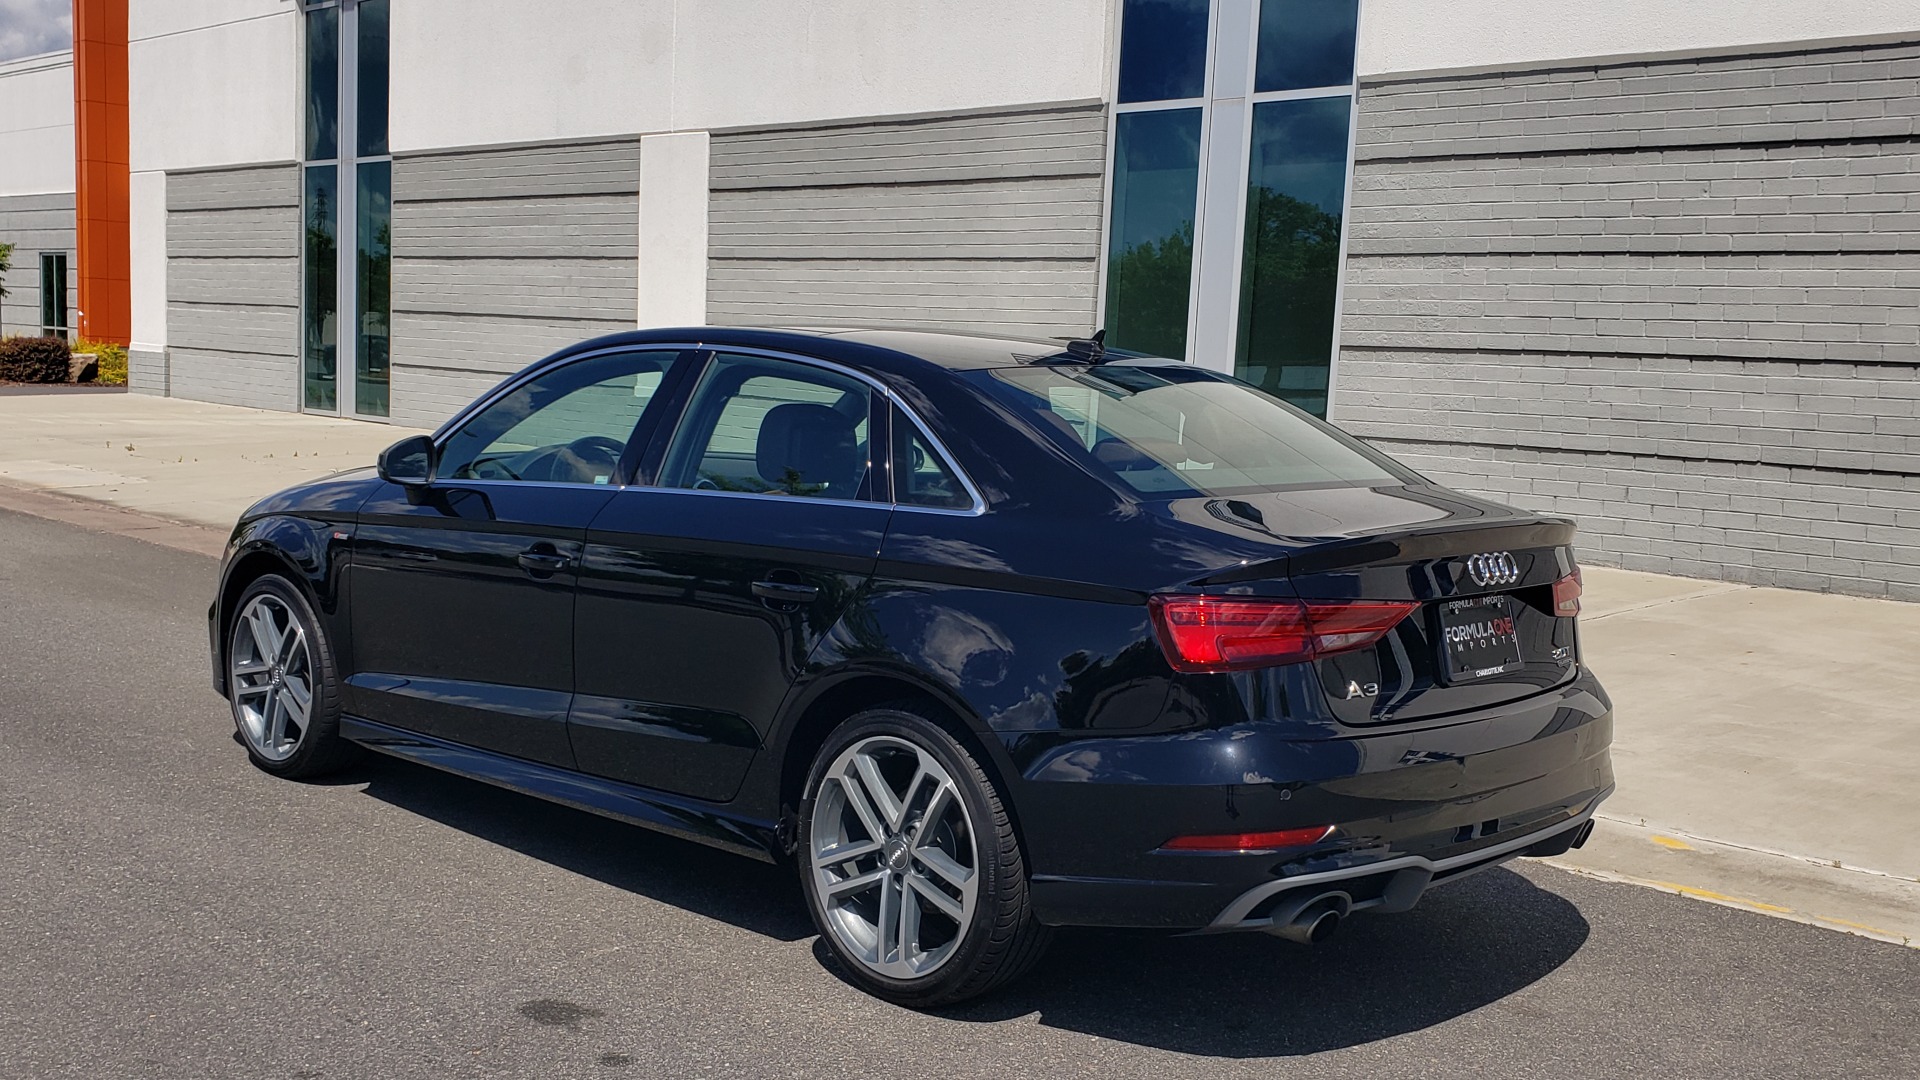 Used 2018 Audi A3 SEDAN PREMIUM PLUS / NAV / PANO-ROOF / B&O SND / LED PKG / REARVIEW for sale Sold at Formula Imports in Charlotte NC 28227 6